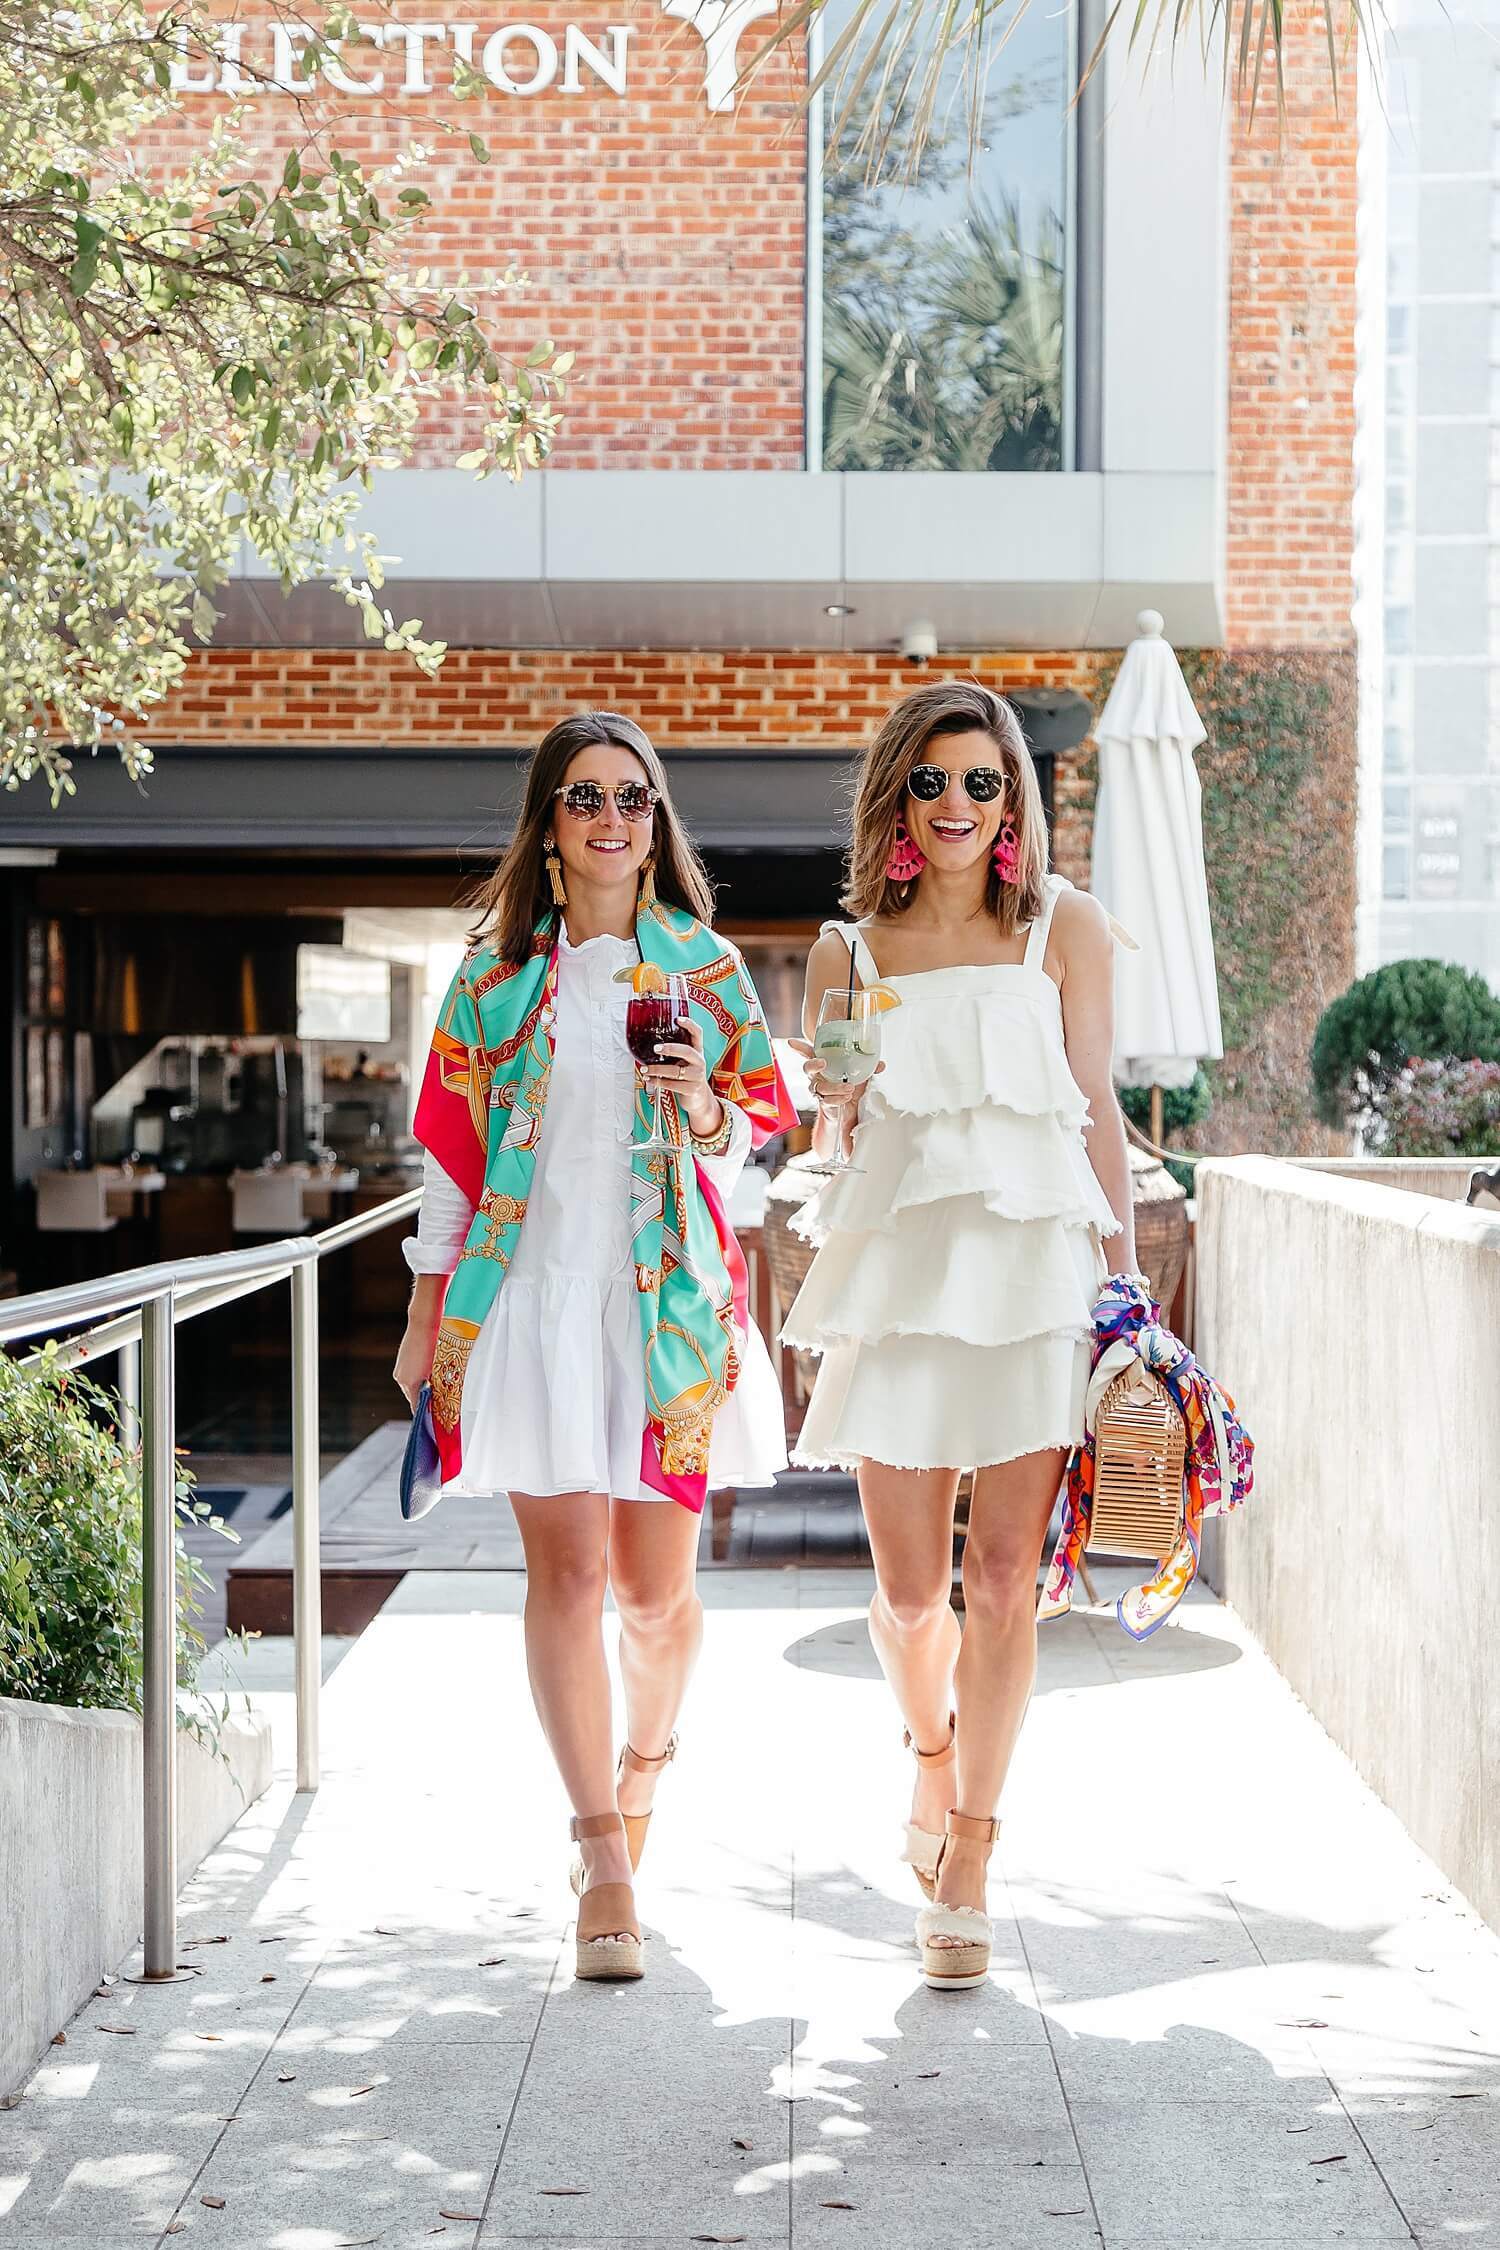 brighton keller and katie frierson sporting tuckernuck spring outfits 18_WEB